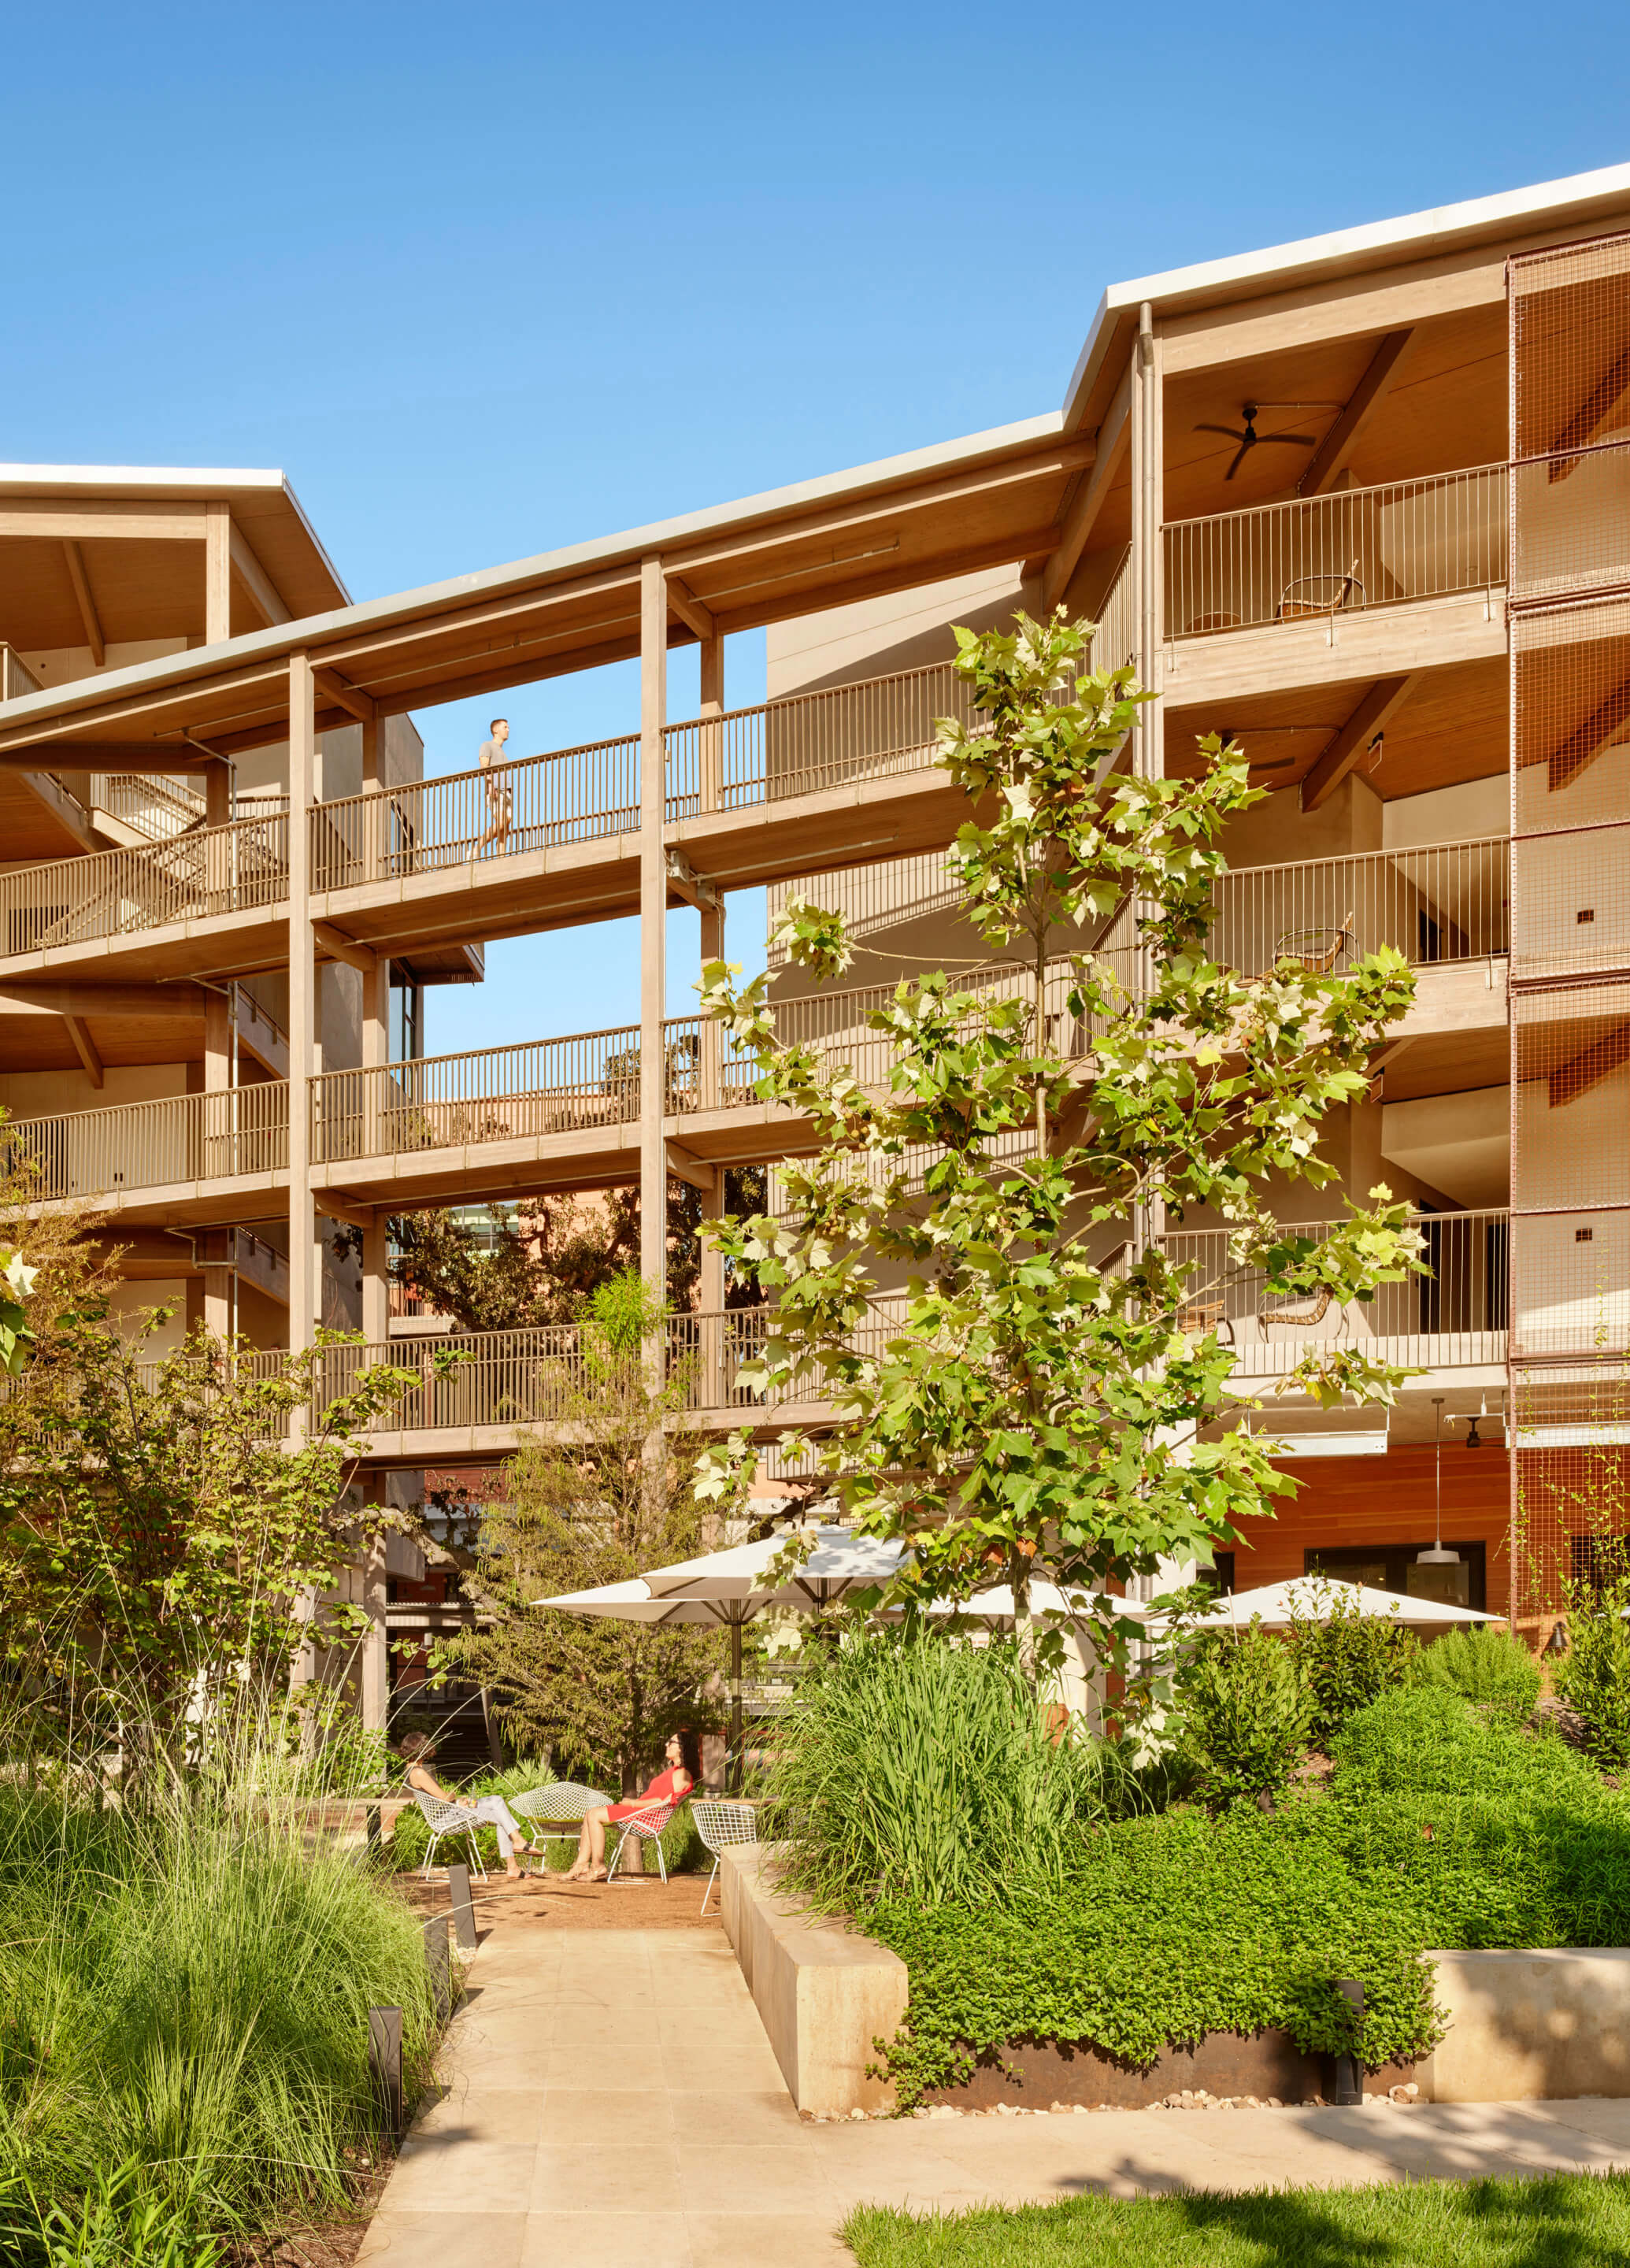 Vertical photo of a hotel with timber flooring and walkways